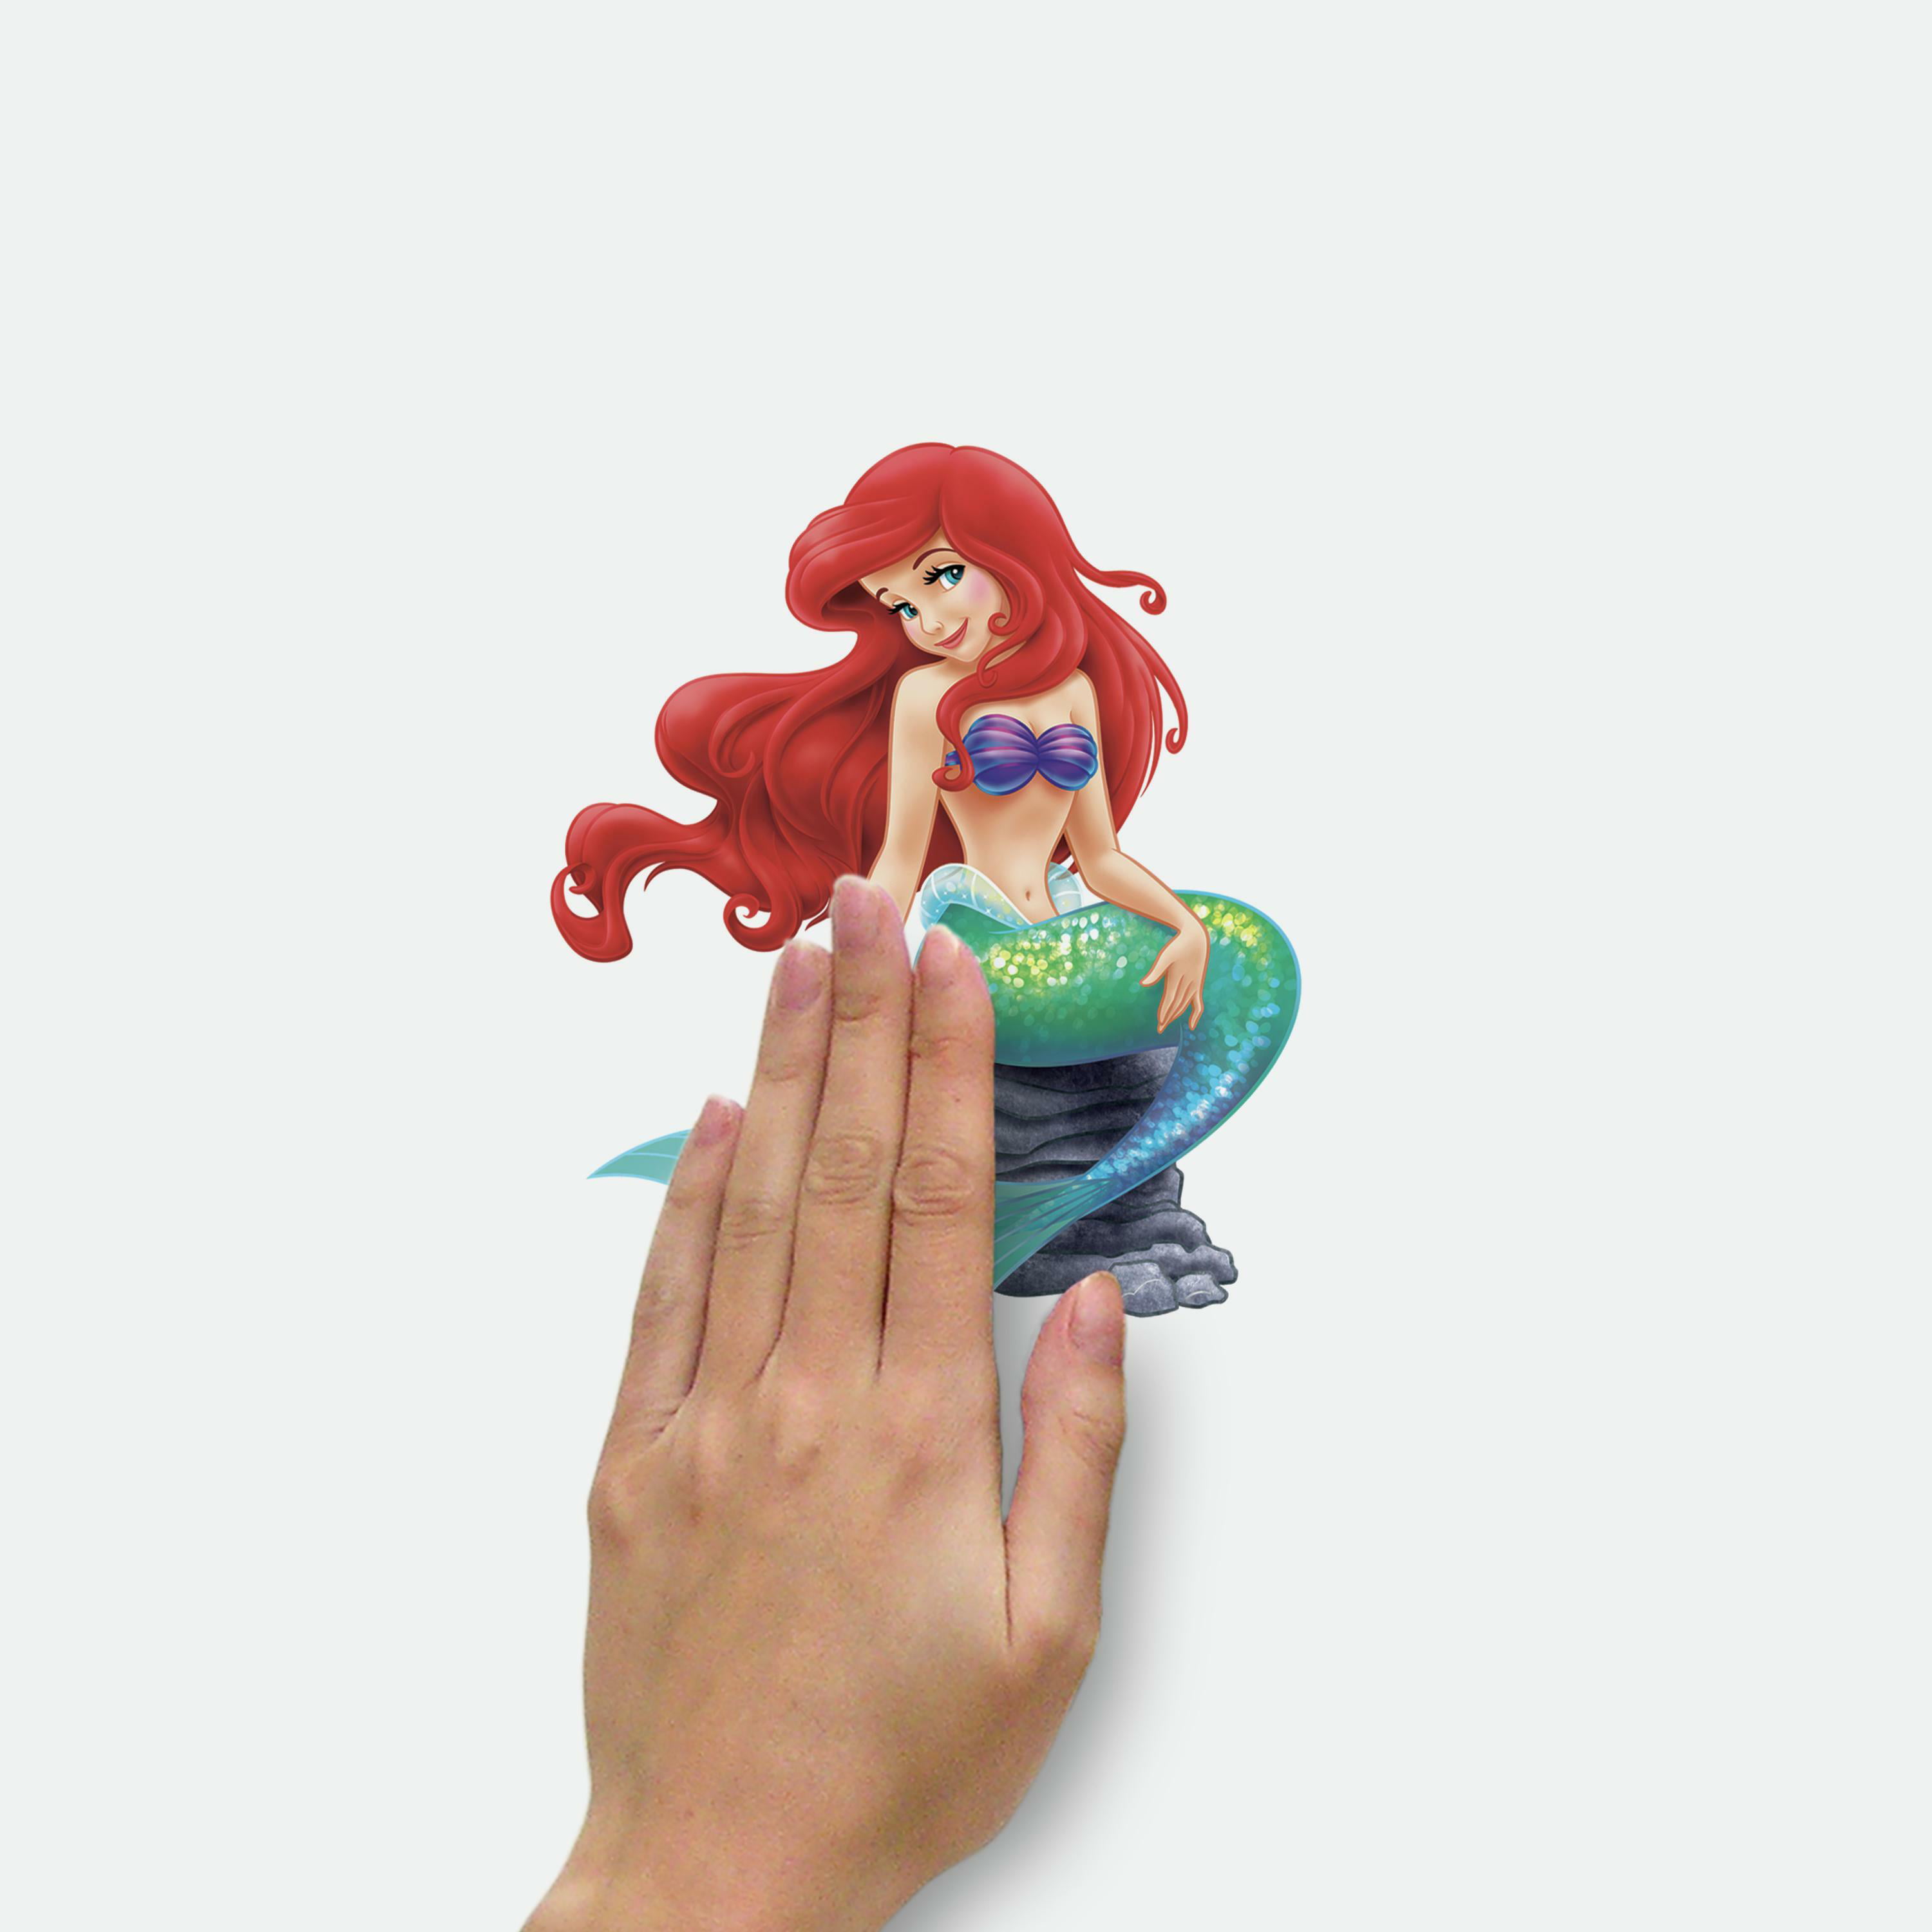 The Little Mermaid Wall Decals Ariel Stickers Kids Room Decor LICENSED Roommates